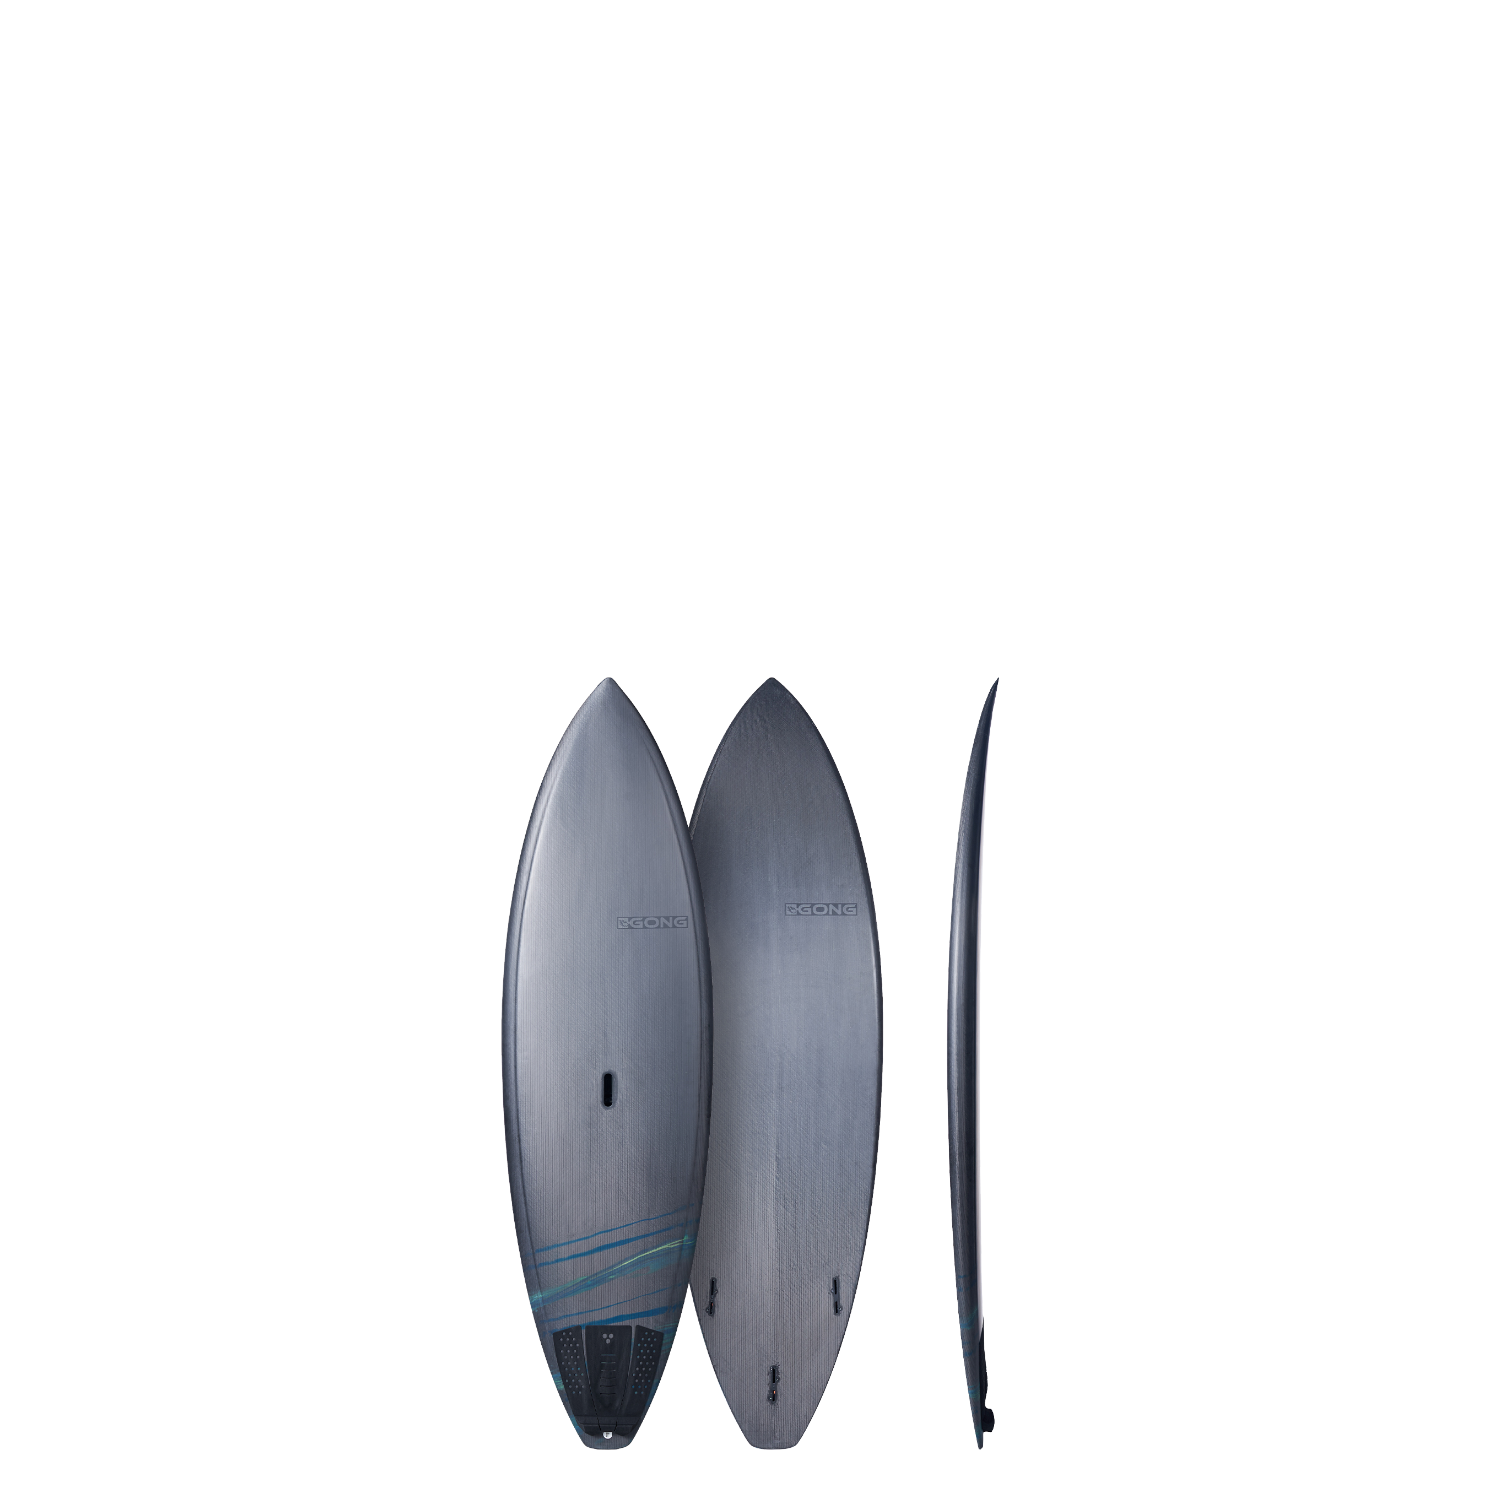 GONG | Factory SUP 7'2 Curve Sp Pro Light FSP Pro SUP Custom